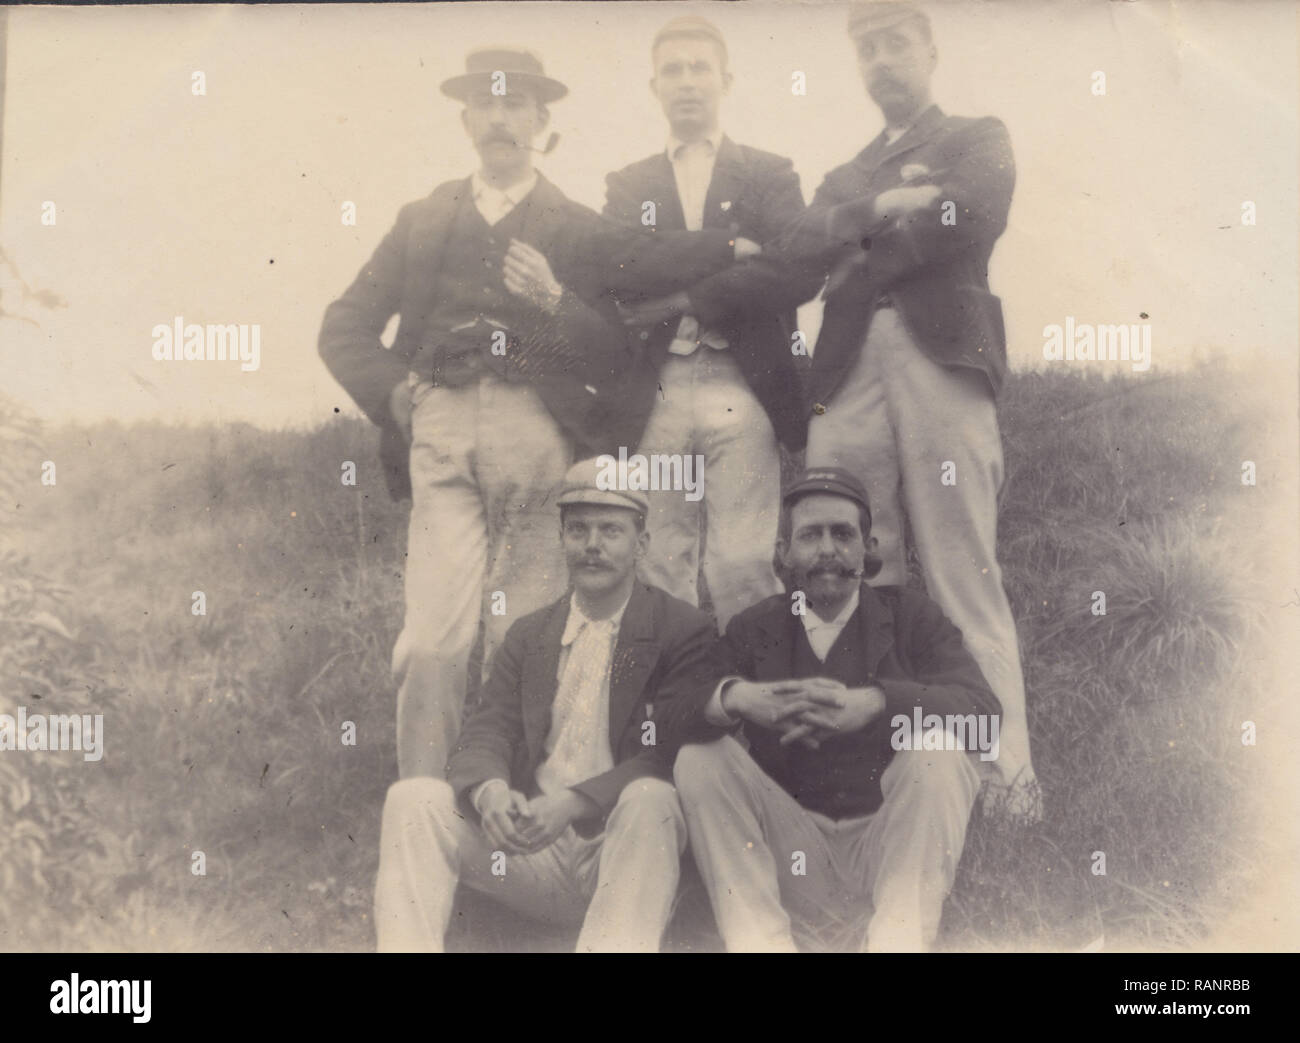 Victorian 1893 Photograph of Cricket Players From The Bohemians Cricket Club. Players Named as (back row) Chapman, G.J.Merrall & Lorns, (front row), Harmer & C.Higgens. Stock Photo